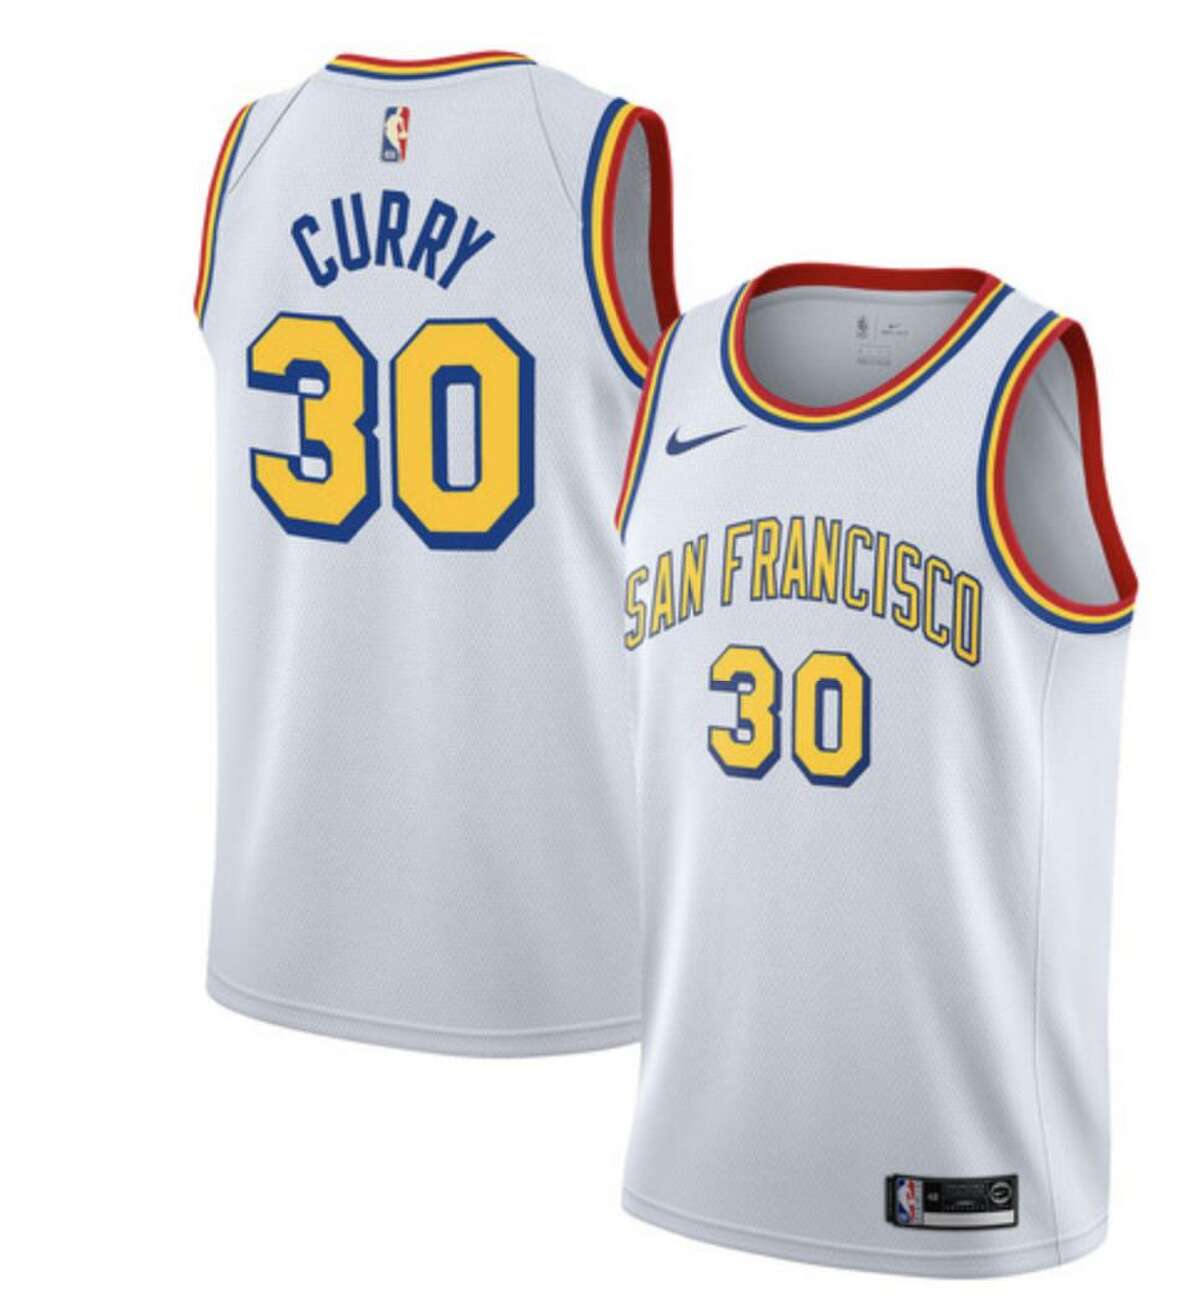 Sale > warriors throwback jersey > in stock